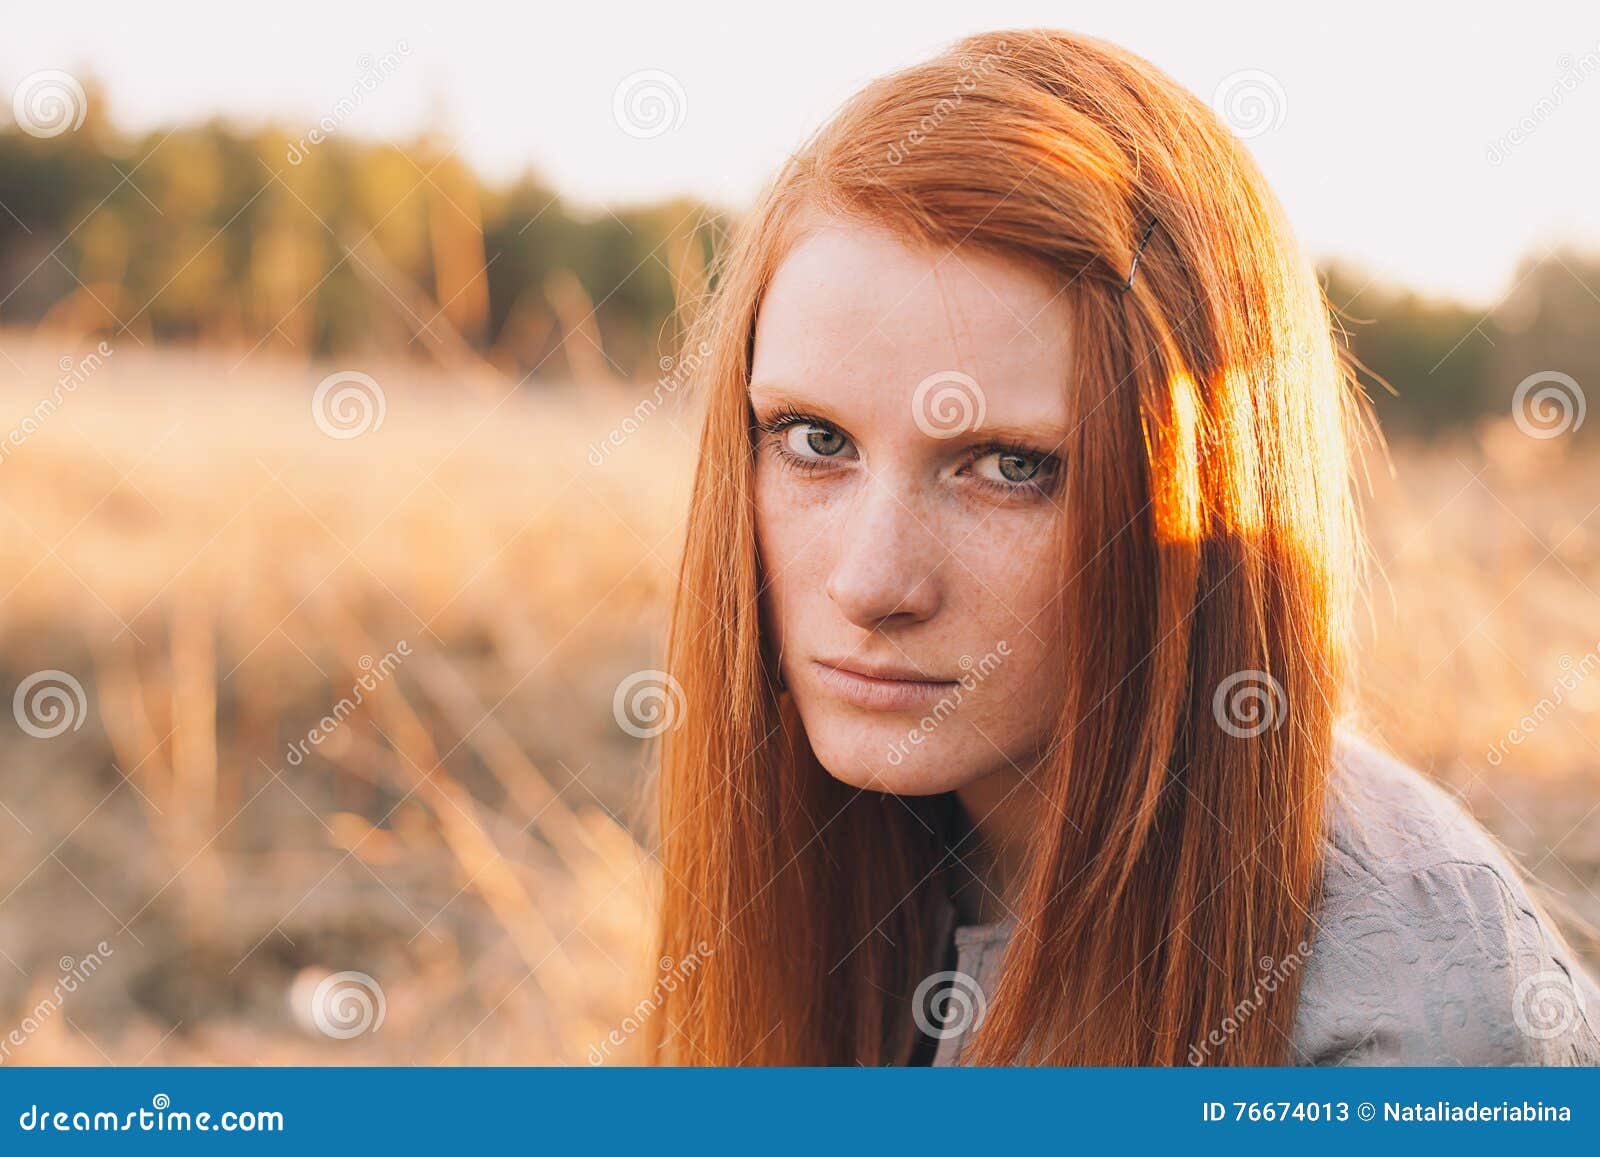 Beauty Young Woman With Red Hair In Golden Field At Sunset 